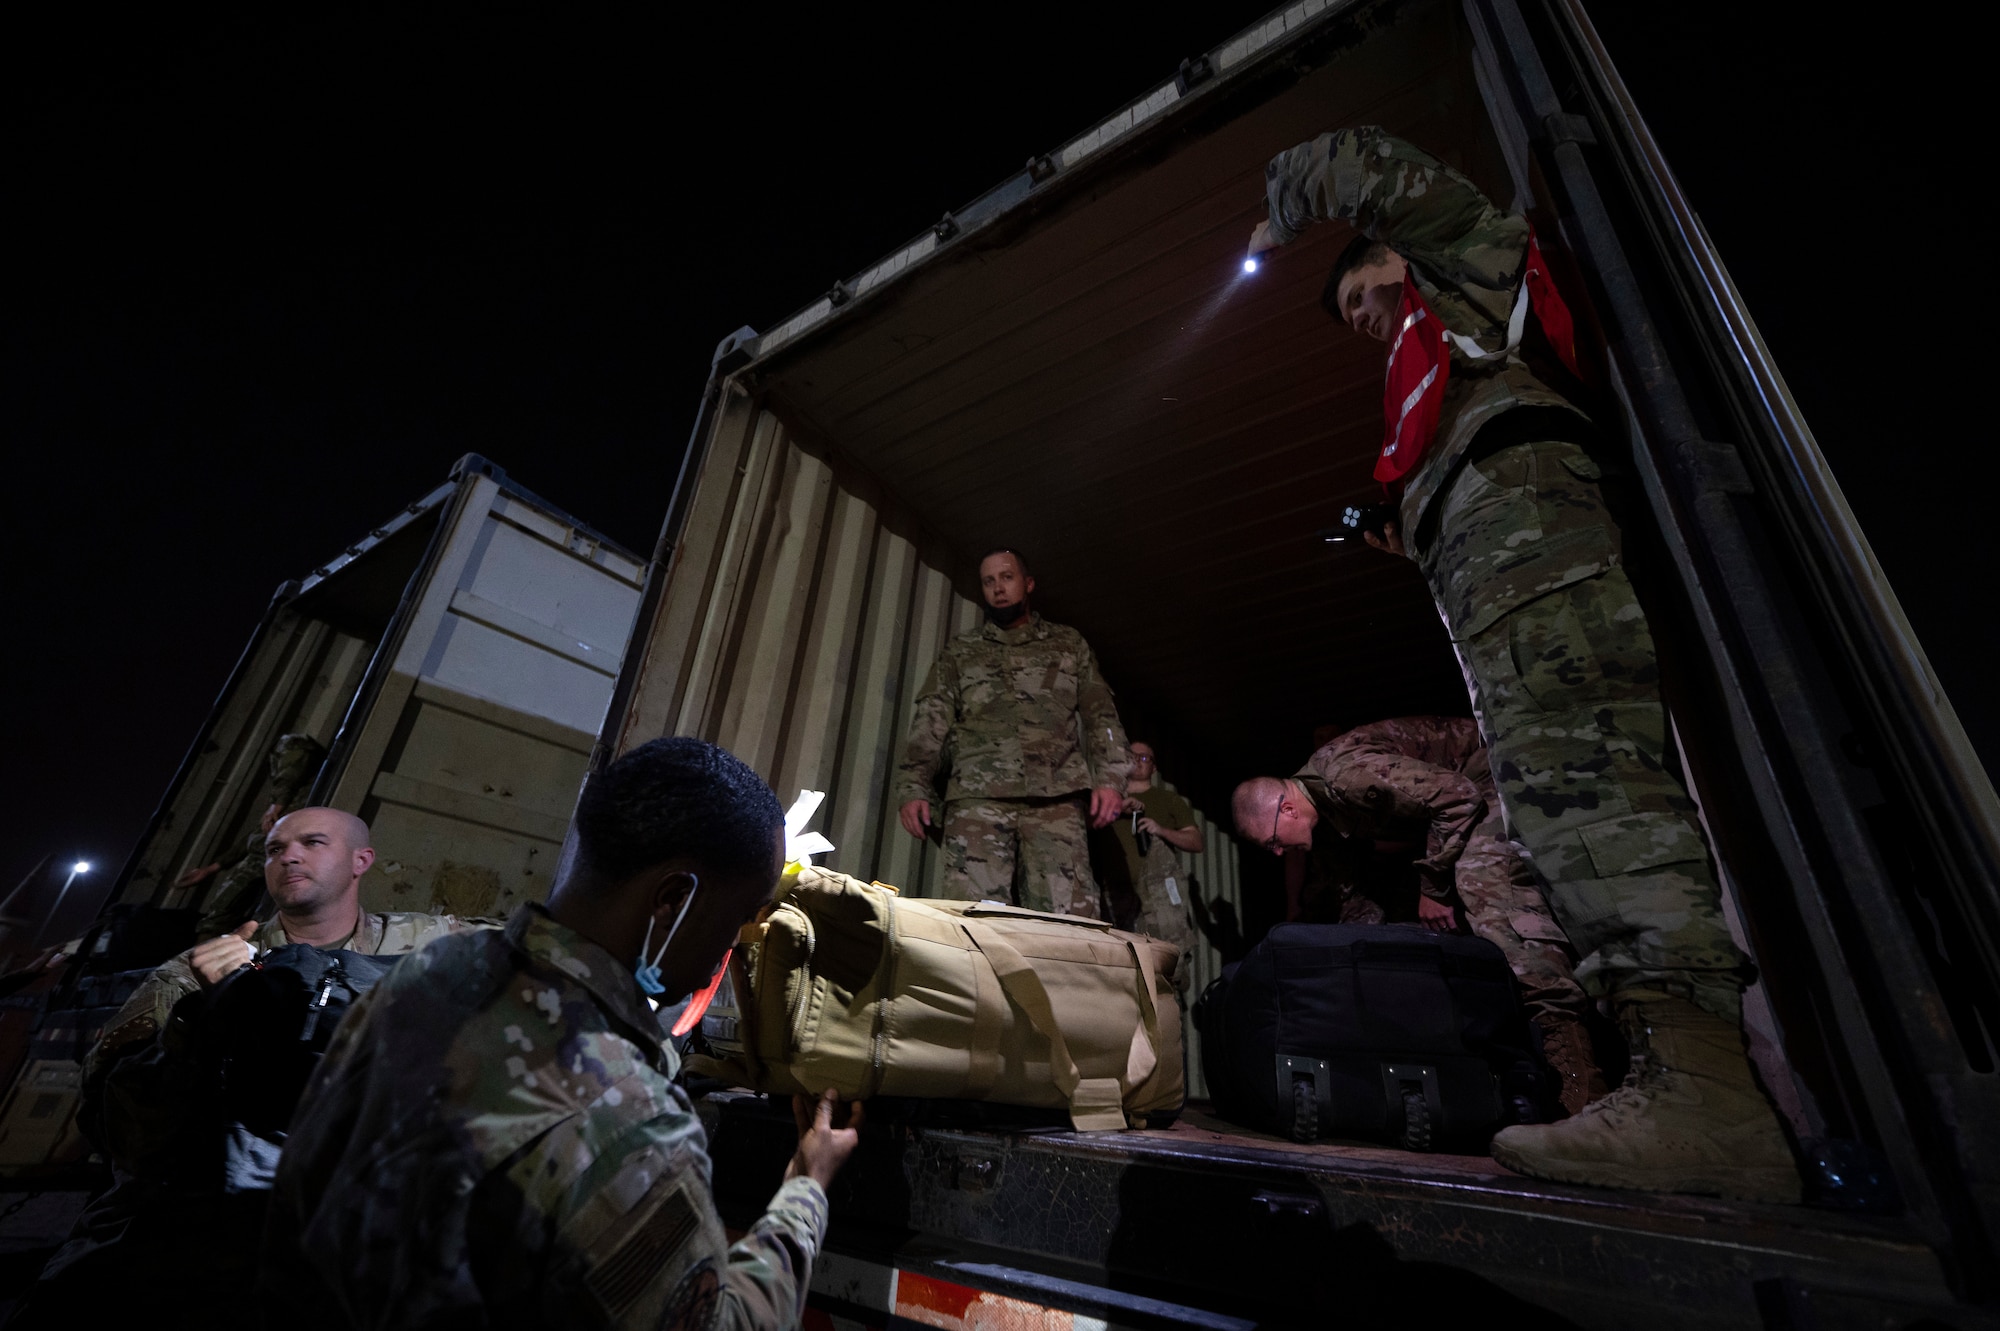 U.S. Air Force Staff Sgt. Darrin Deason, 386th Expeditionary Force Support Squadron Personnel Support for Contingency Operations customer support technician, assists inprocessing Airmen with unloading their luggage at Ali Al Salem Air Base, Kuwait, July 16, 2022. From rehearsing roles and responsibilities ahead of time, to coordinating with dozens of organizations on the installation, the 386th EFSS PERSCO team strive to make their inprocessing system as efficient as possible. (U.S. Air Force photo by Staff Sgt. Dalton Williams)